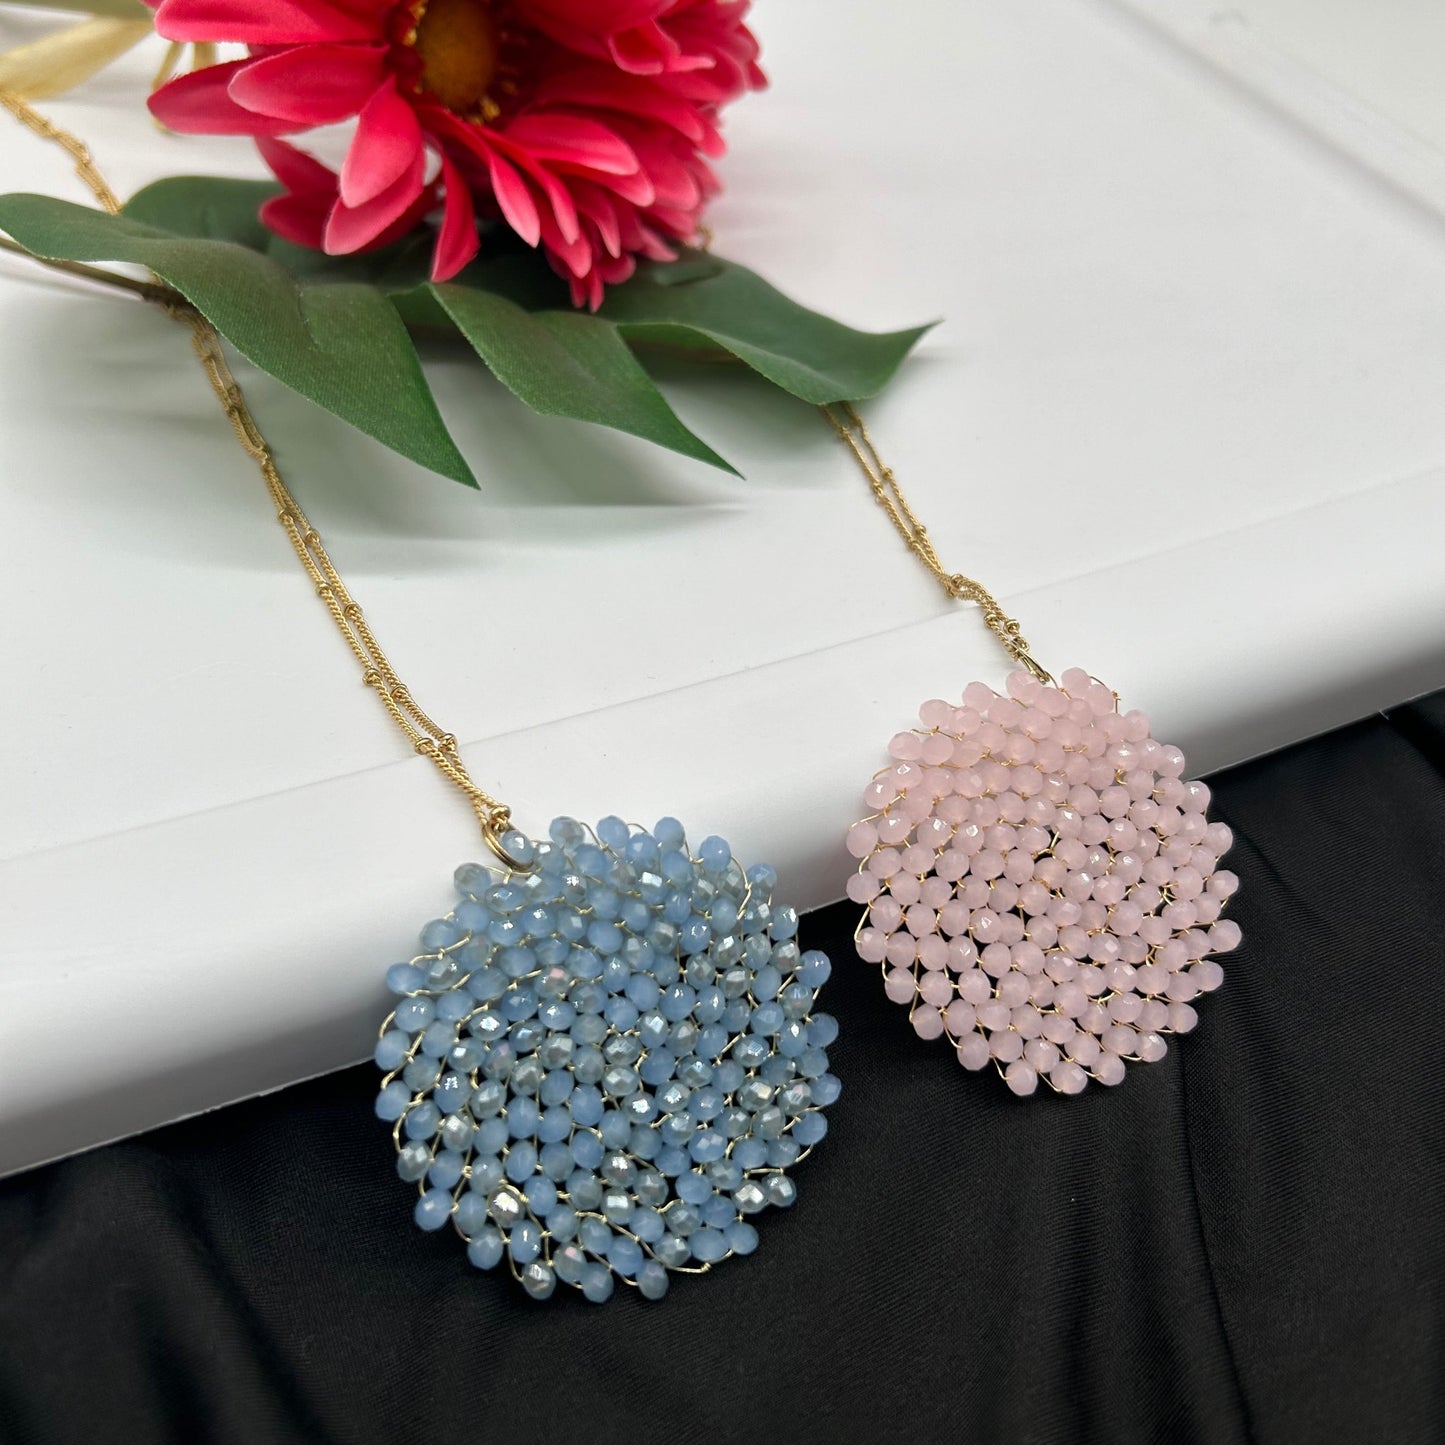 Shimmering delicate beaded circle pendant necklace, in light blue and pink. Perfect for spring!